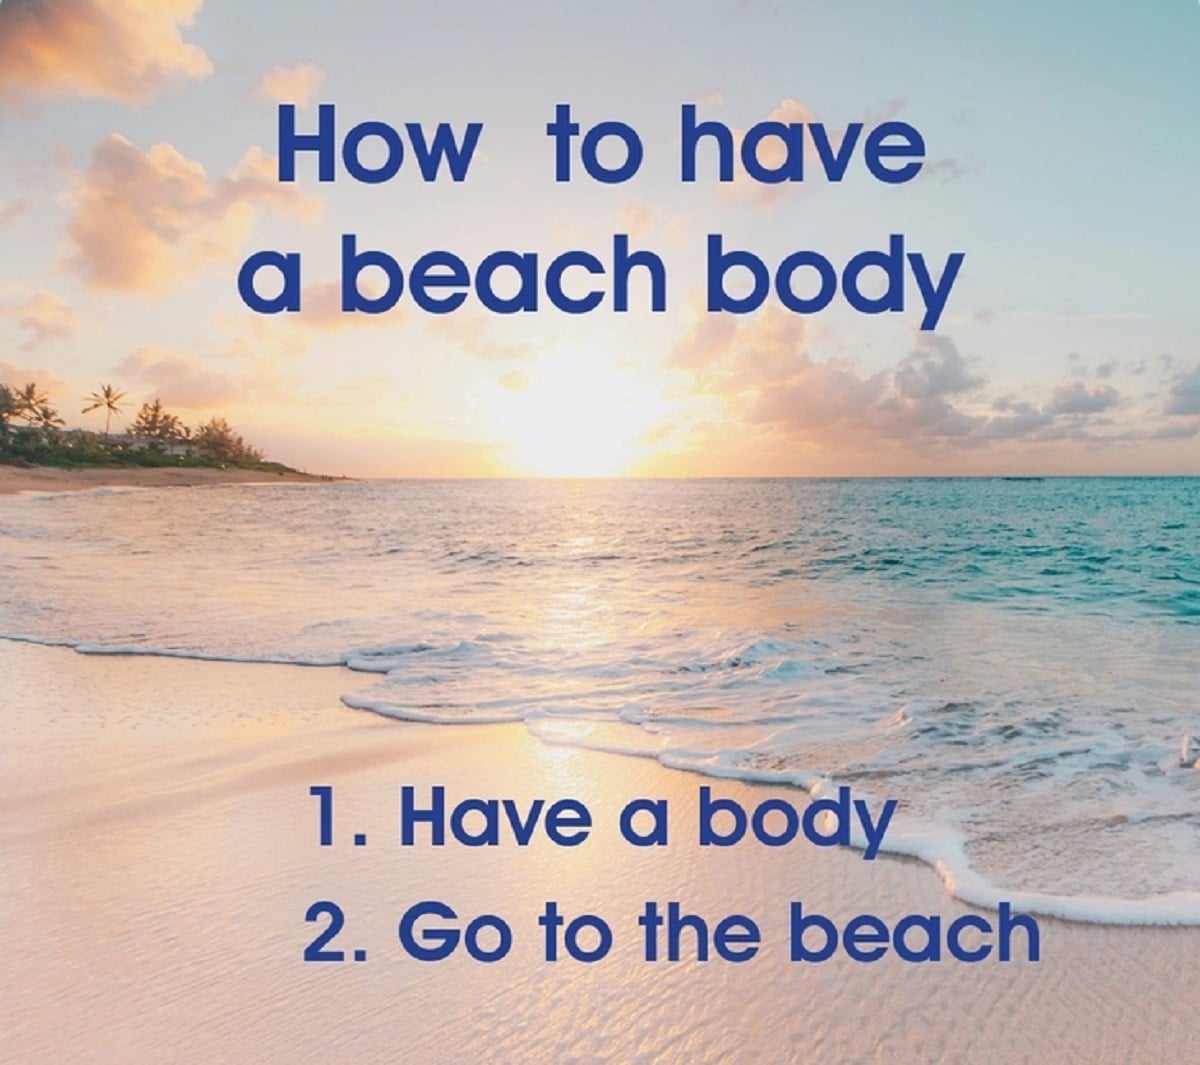 Photo of the beach that says "How to have a beach body 1. Have a body 2. Go to the beach